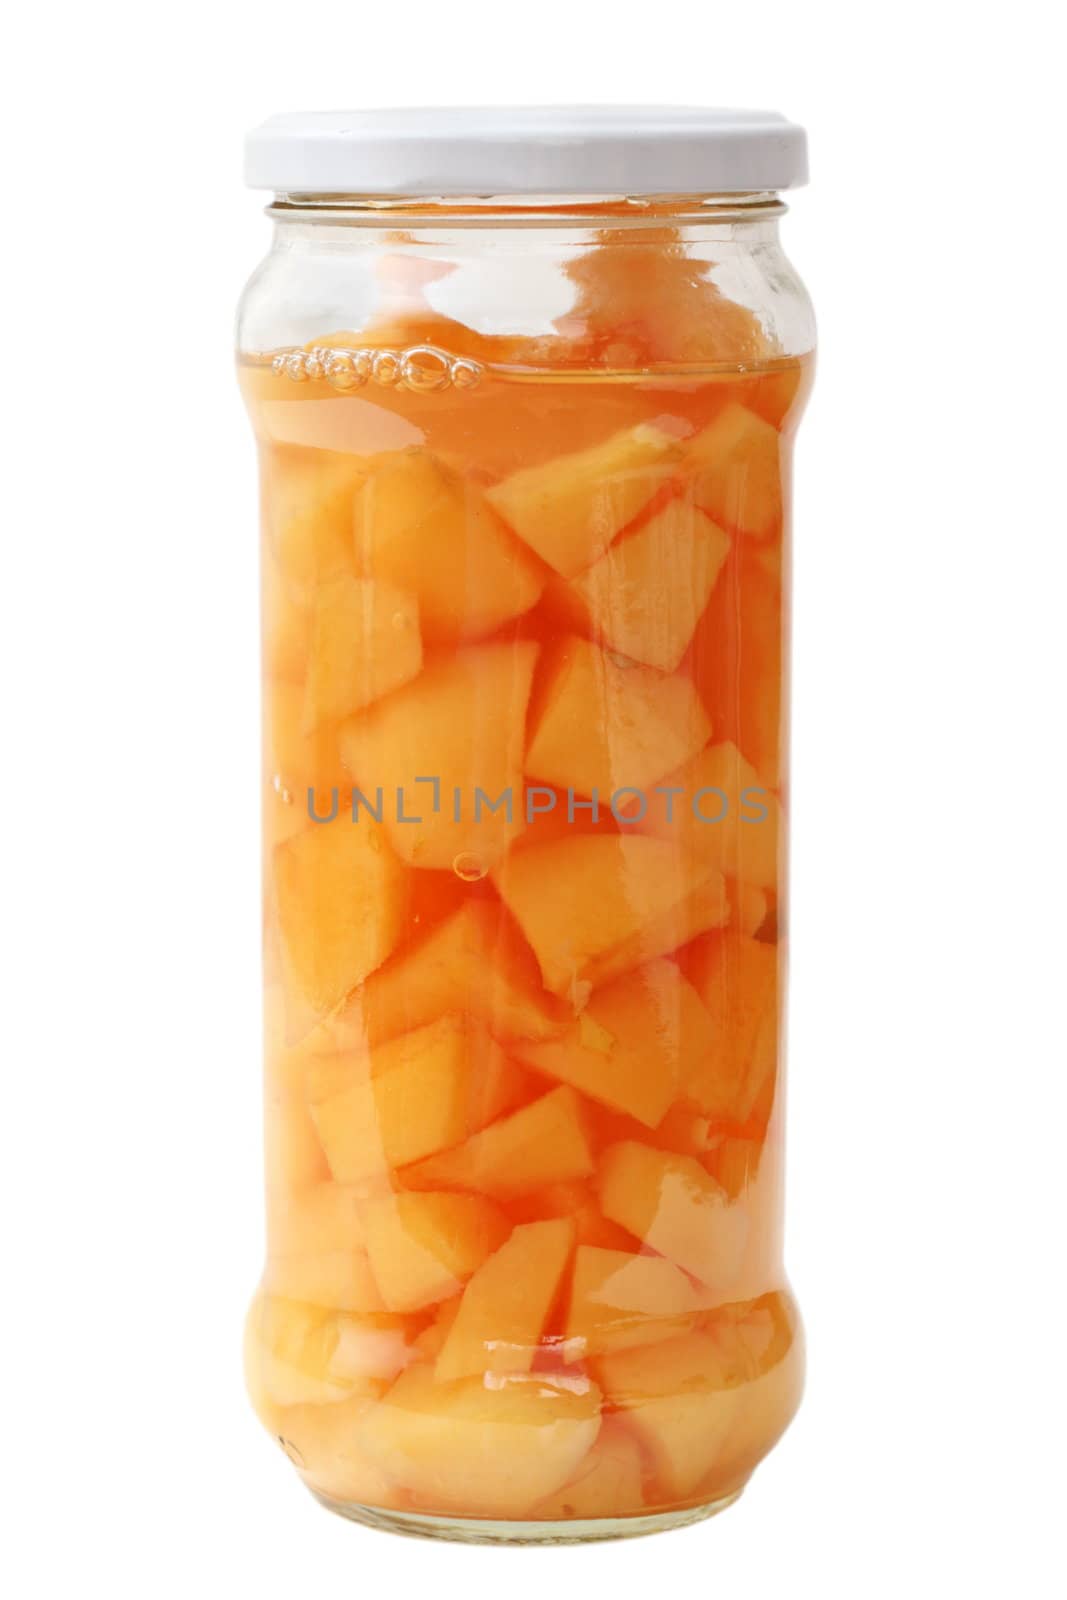 stewed fruits in a jar by taviphoto